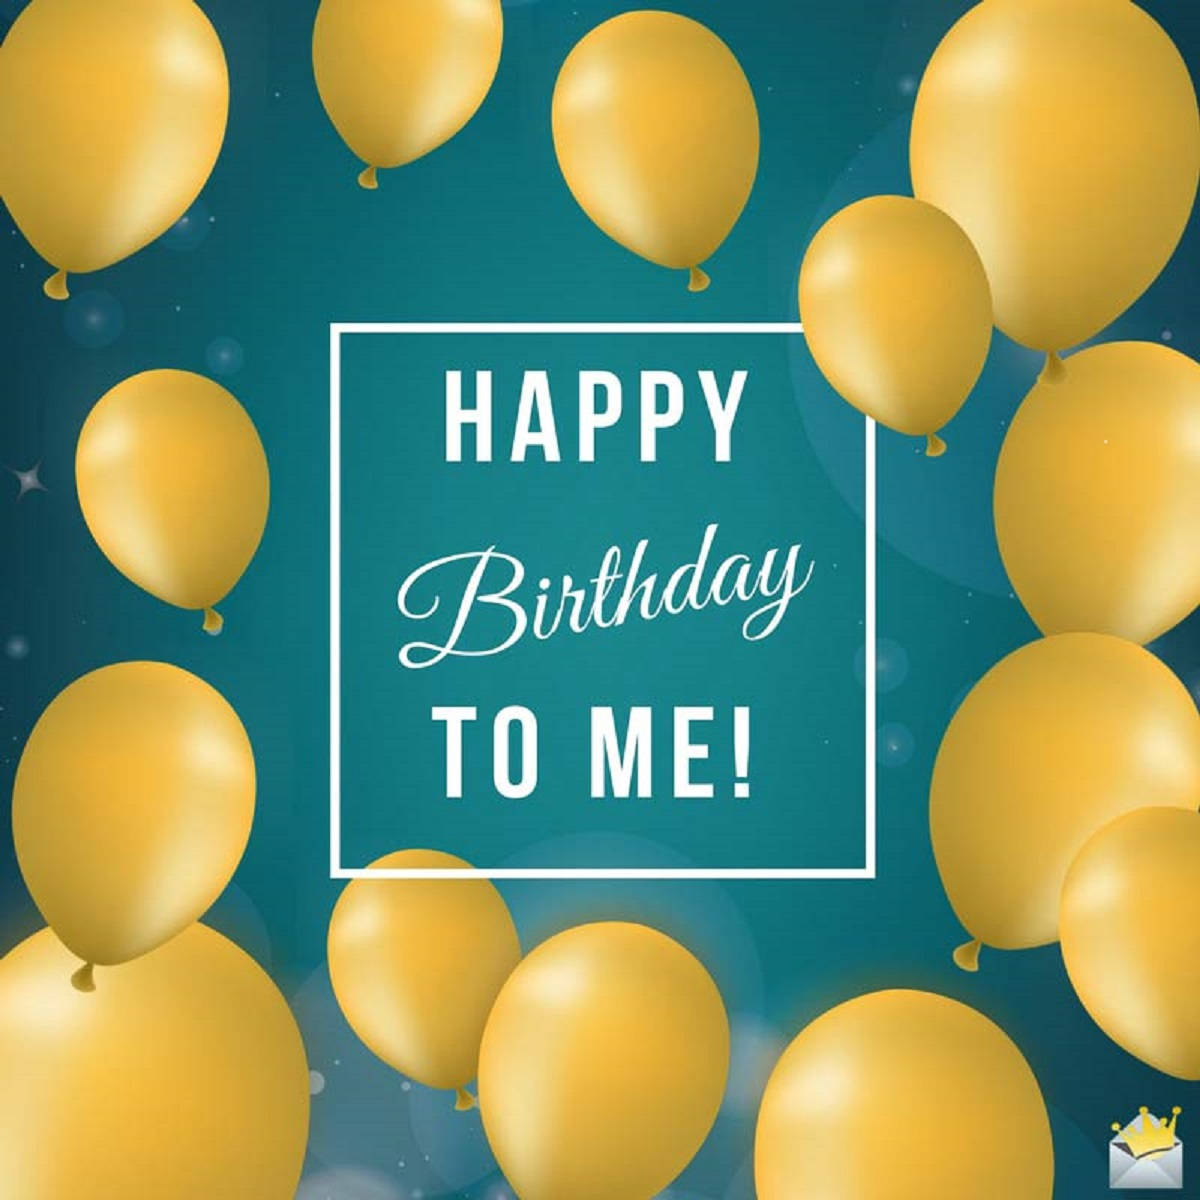 Download Happy Birthday To Me With Yellow Balloons Wallpaper ...